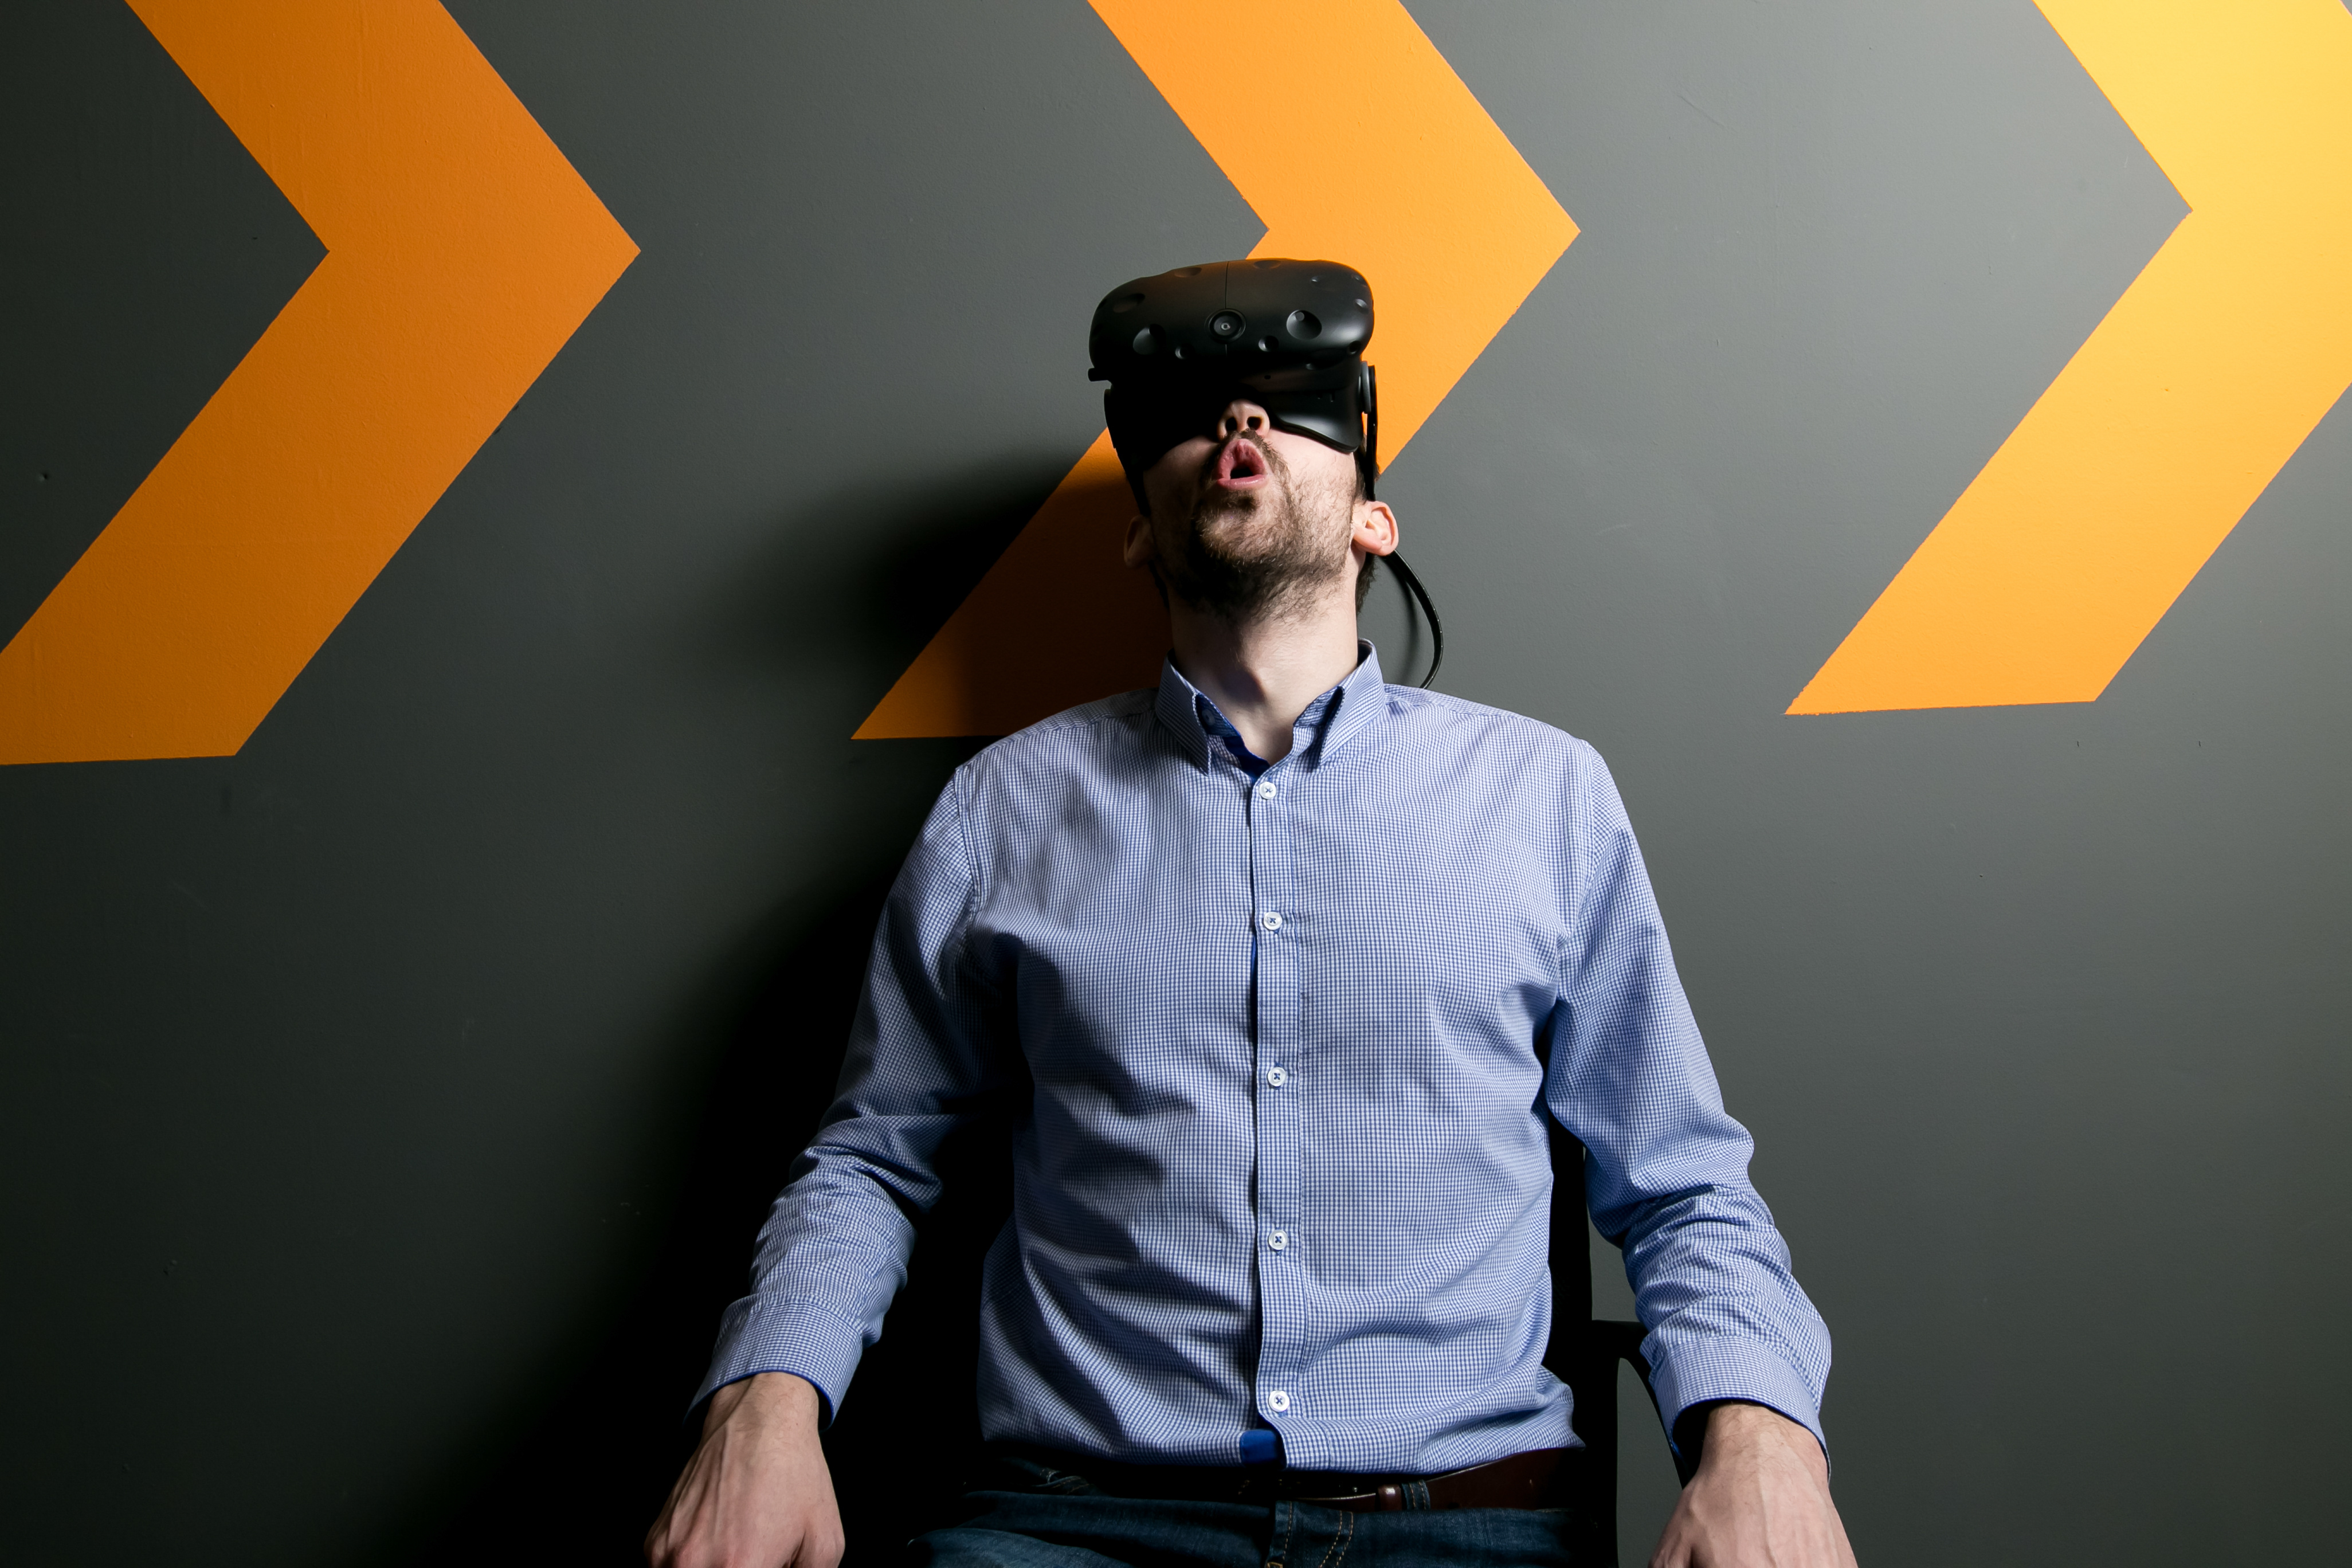 Man in VR headset to demonstrate the Commercial VR Business Model